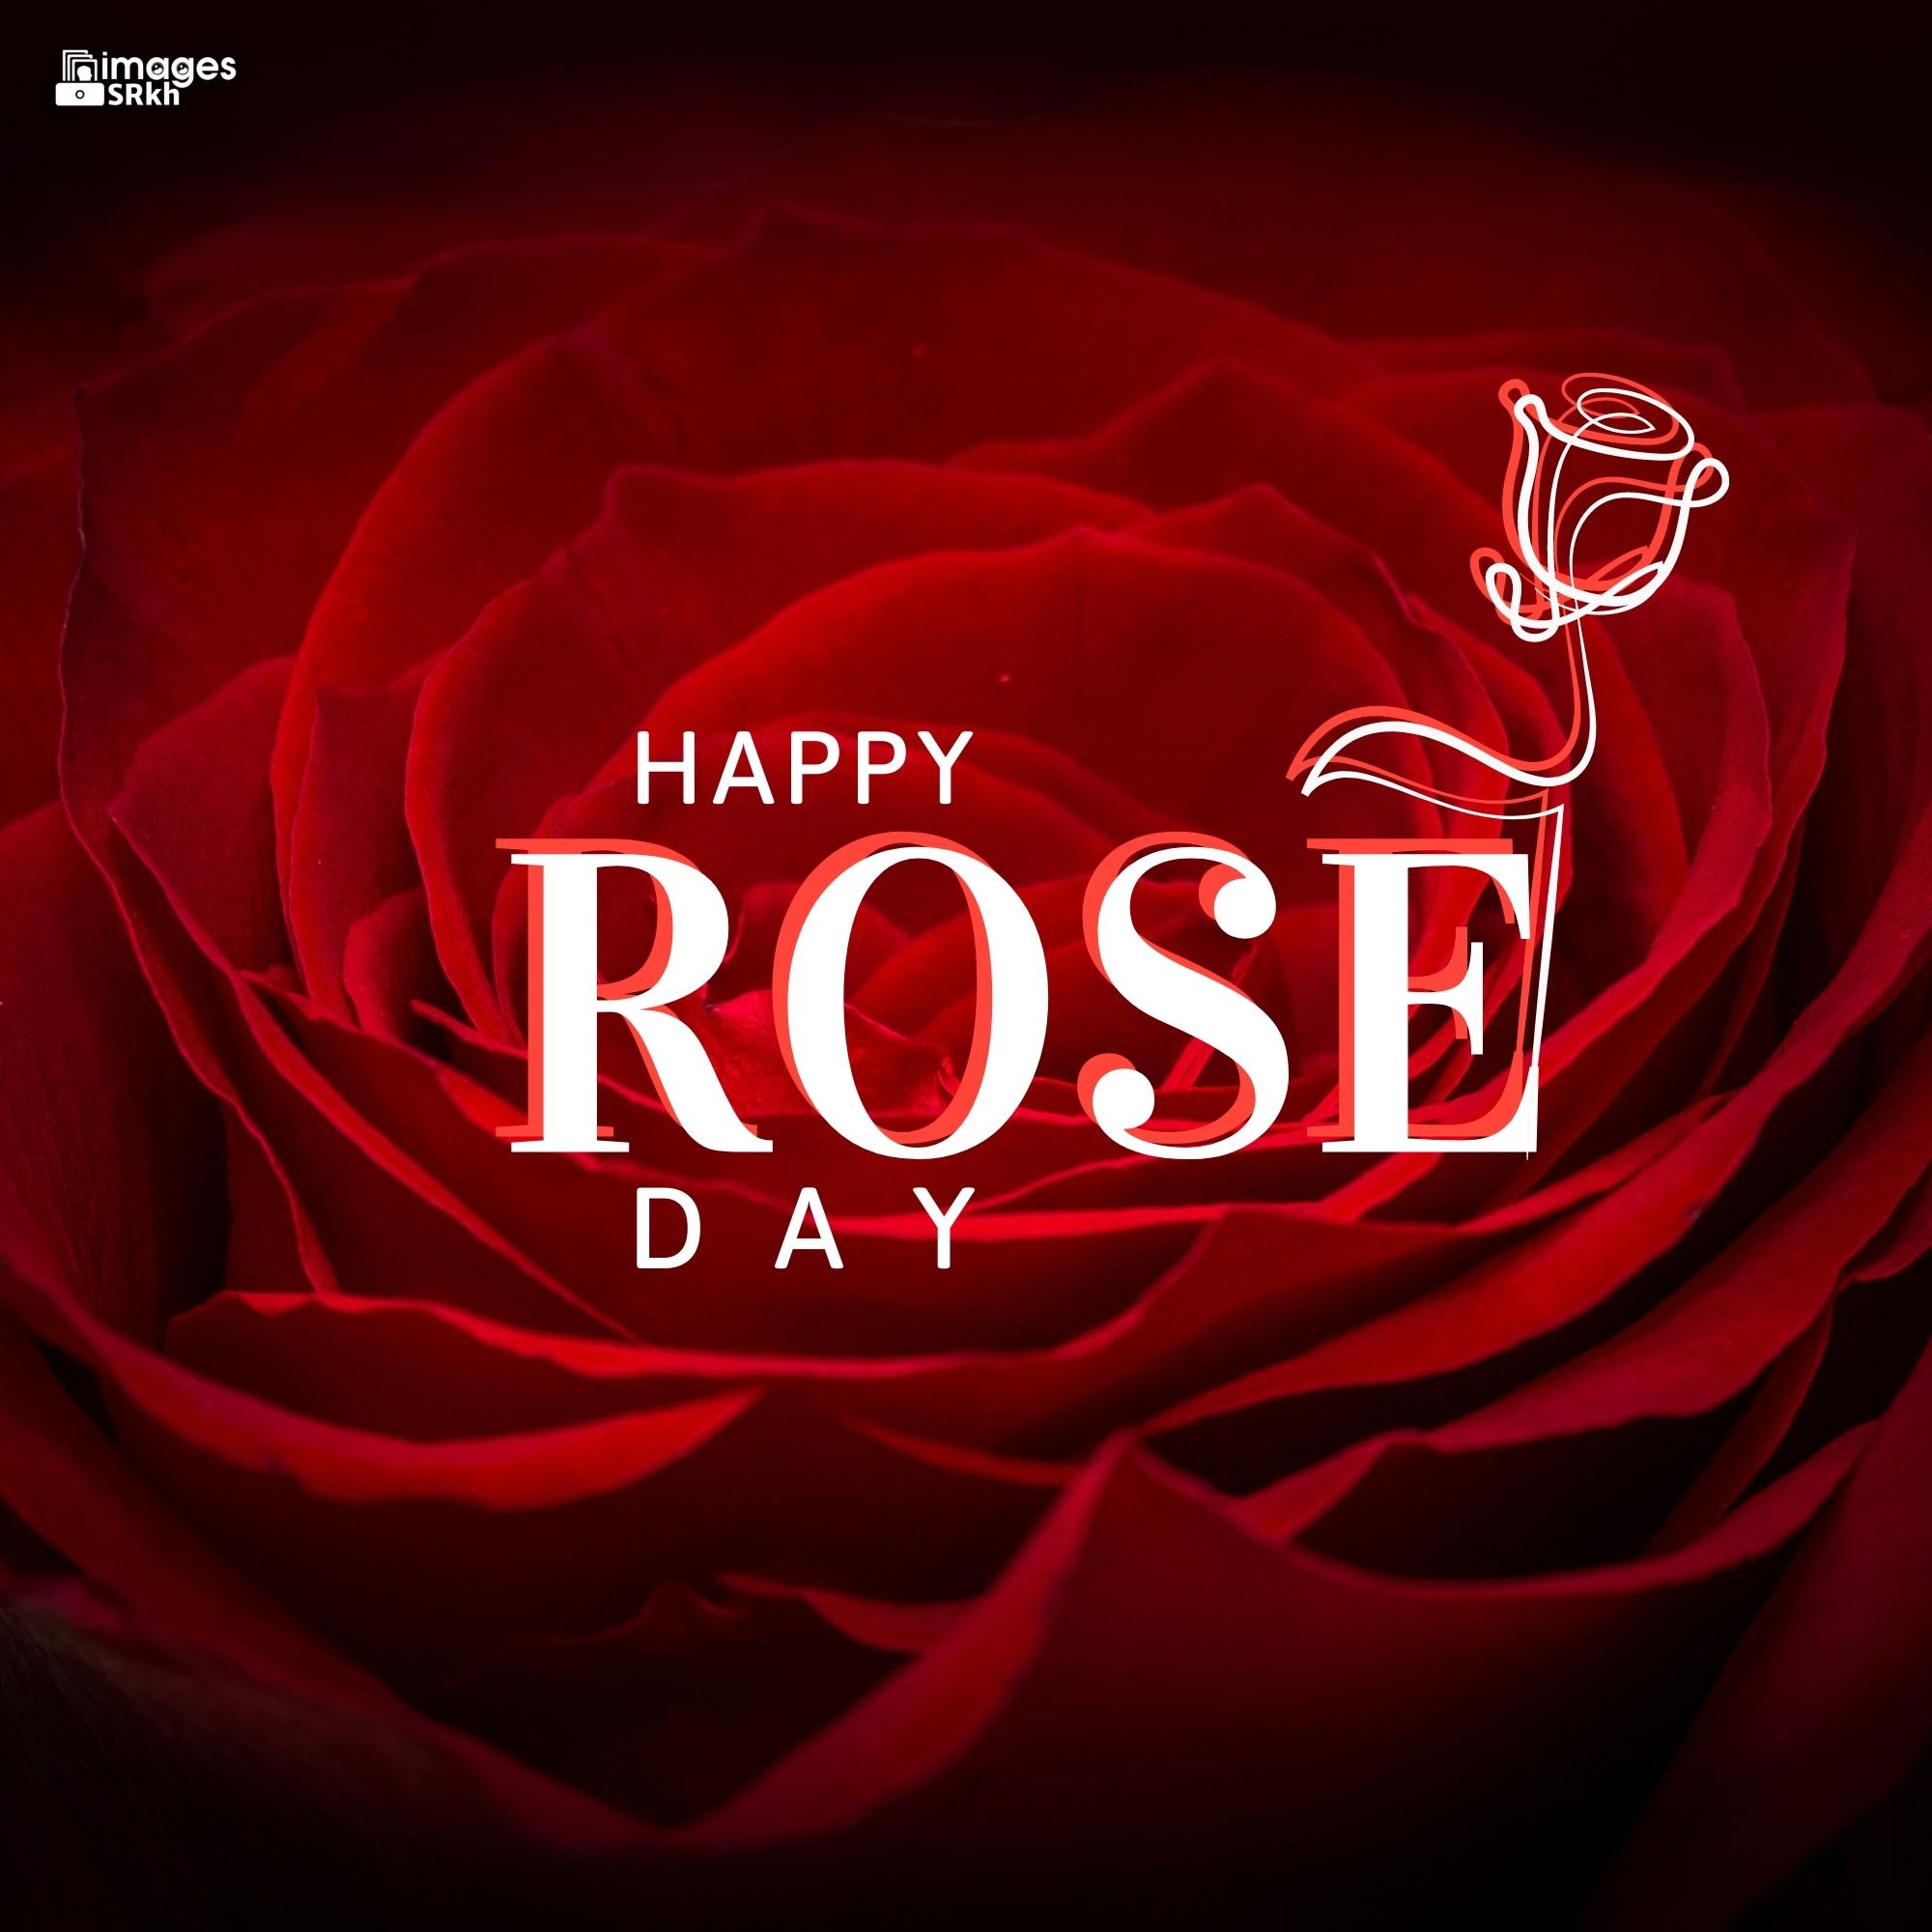 Happy Rose Day Image Hd Download (101)